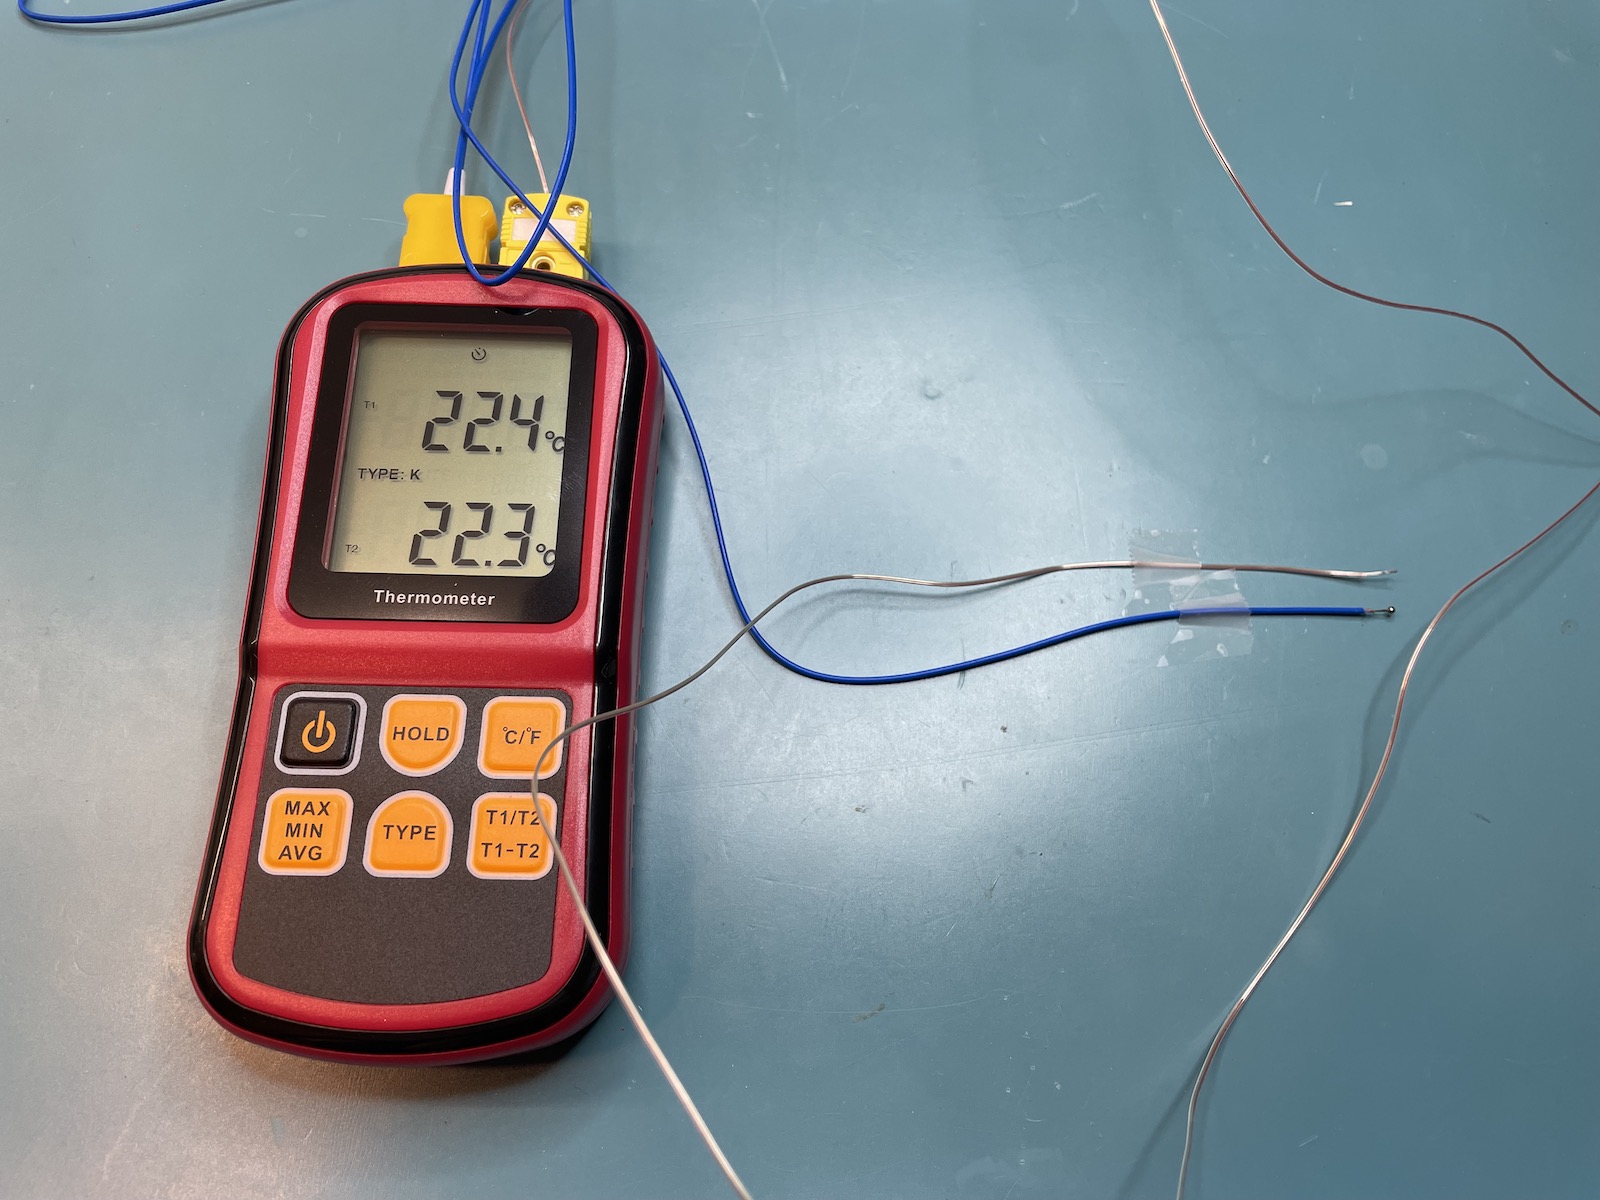 Two different thermocouples